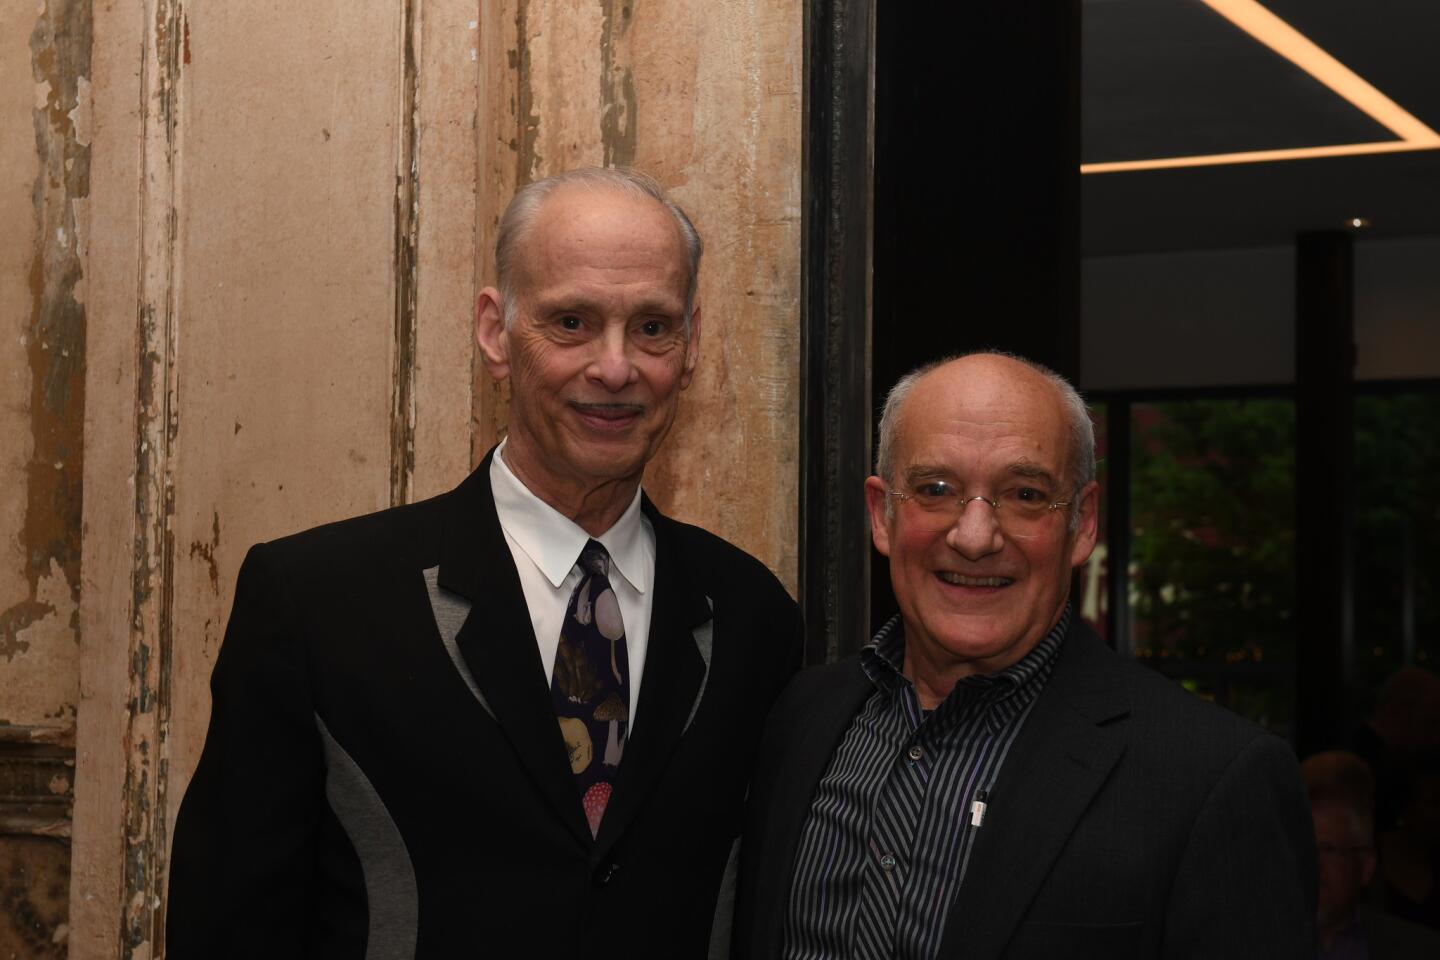 John Waters, left, and Jed Dietz attended Maryland Film Festival's Director's Cut: A Celebration of Jed Dietz at The Stavros Niarchos Foundation Parkway Theatre.